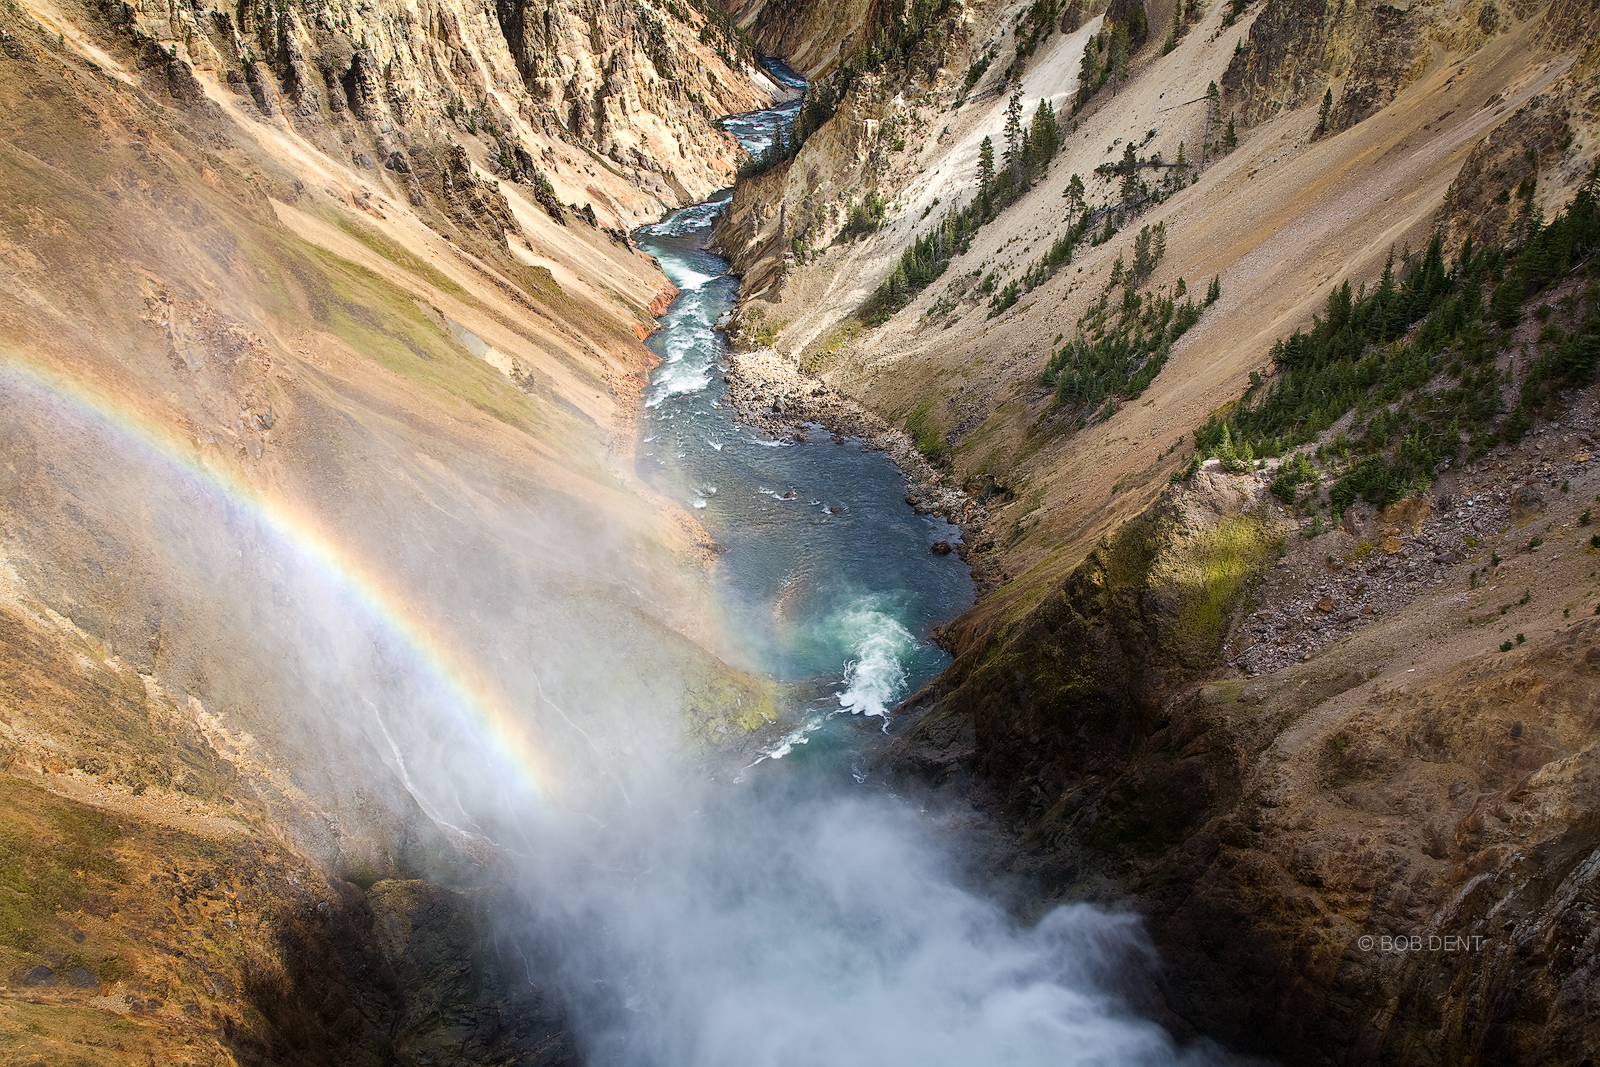 Looking out over the Yellowstone River from the brink of the Lower Falls, Yellowstone National Park, Wyoming.